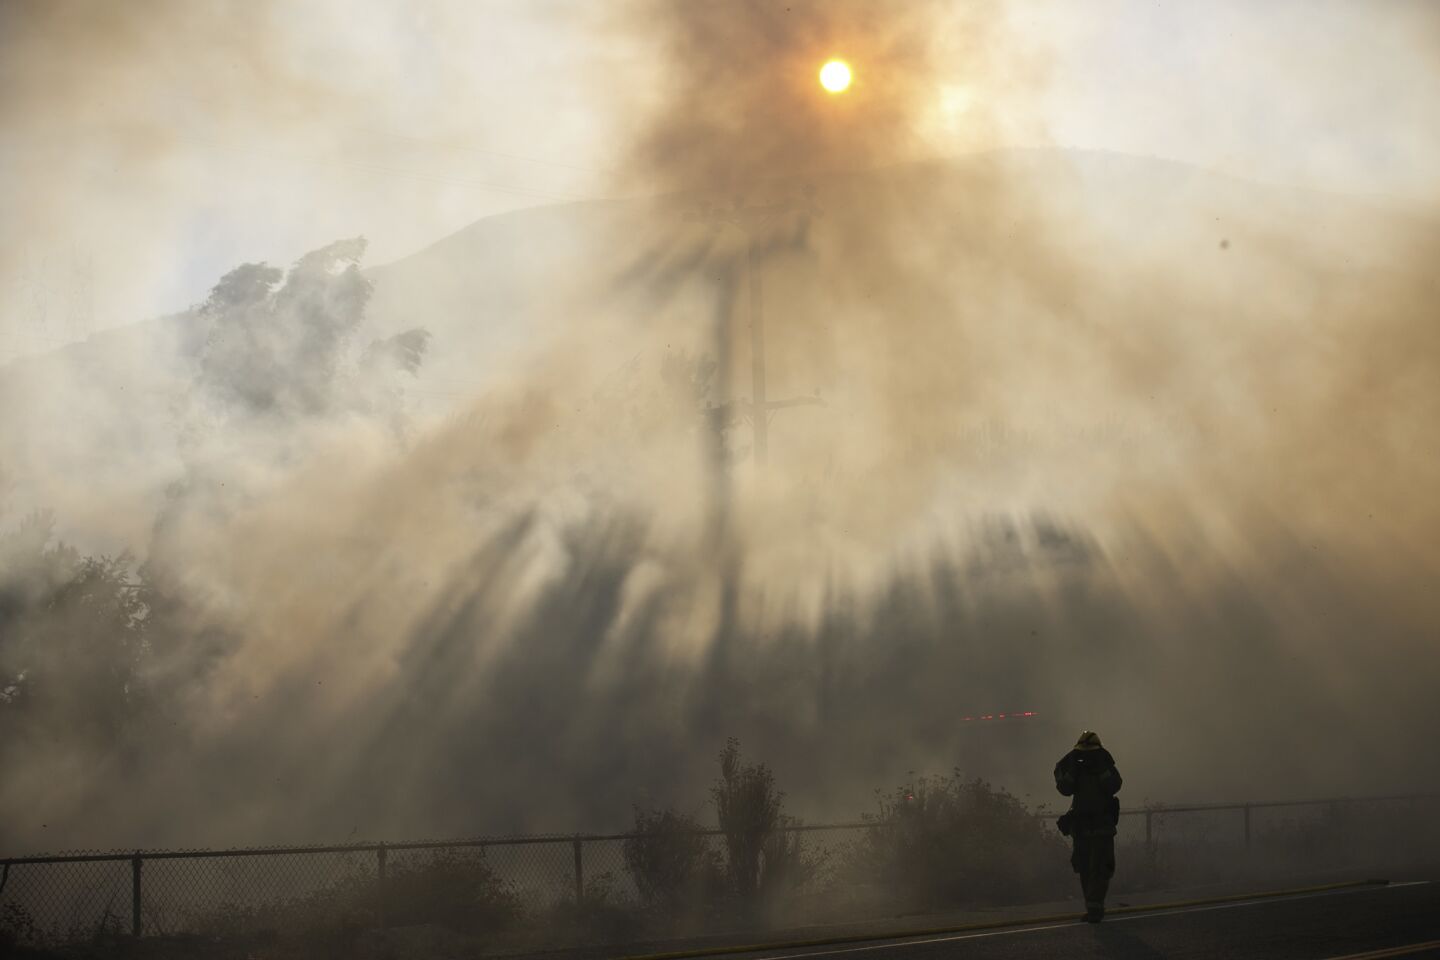 Firefighters work to extinguish flames on Cajon Blvd along the interstate 15, in San Bernardino County on Aug. 17.